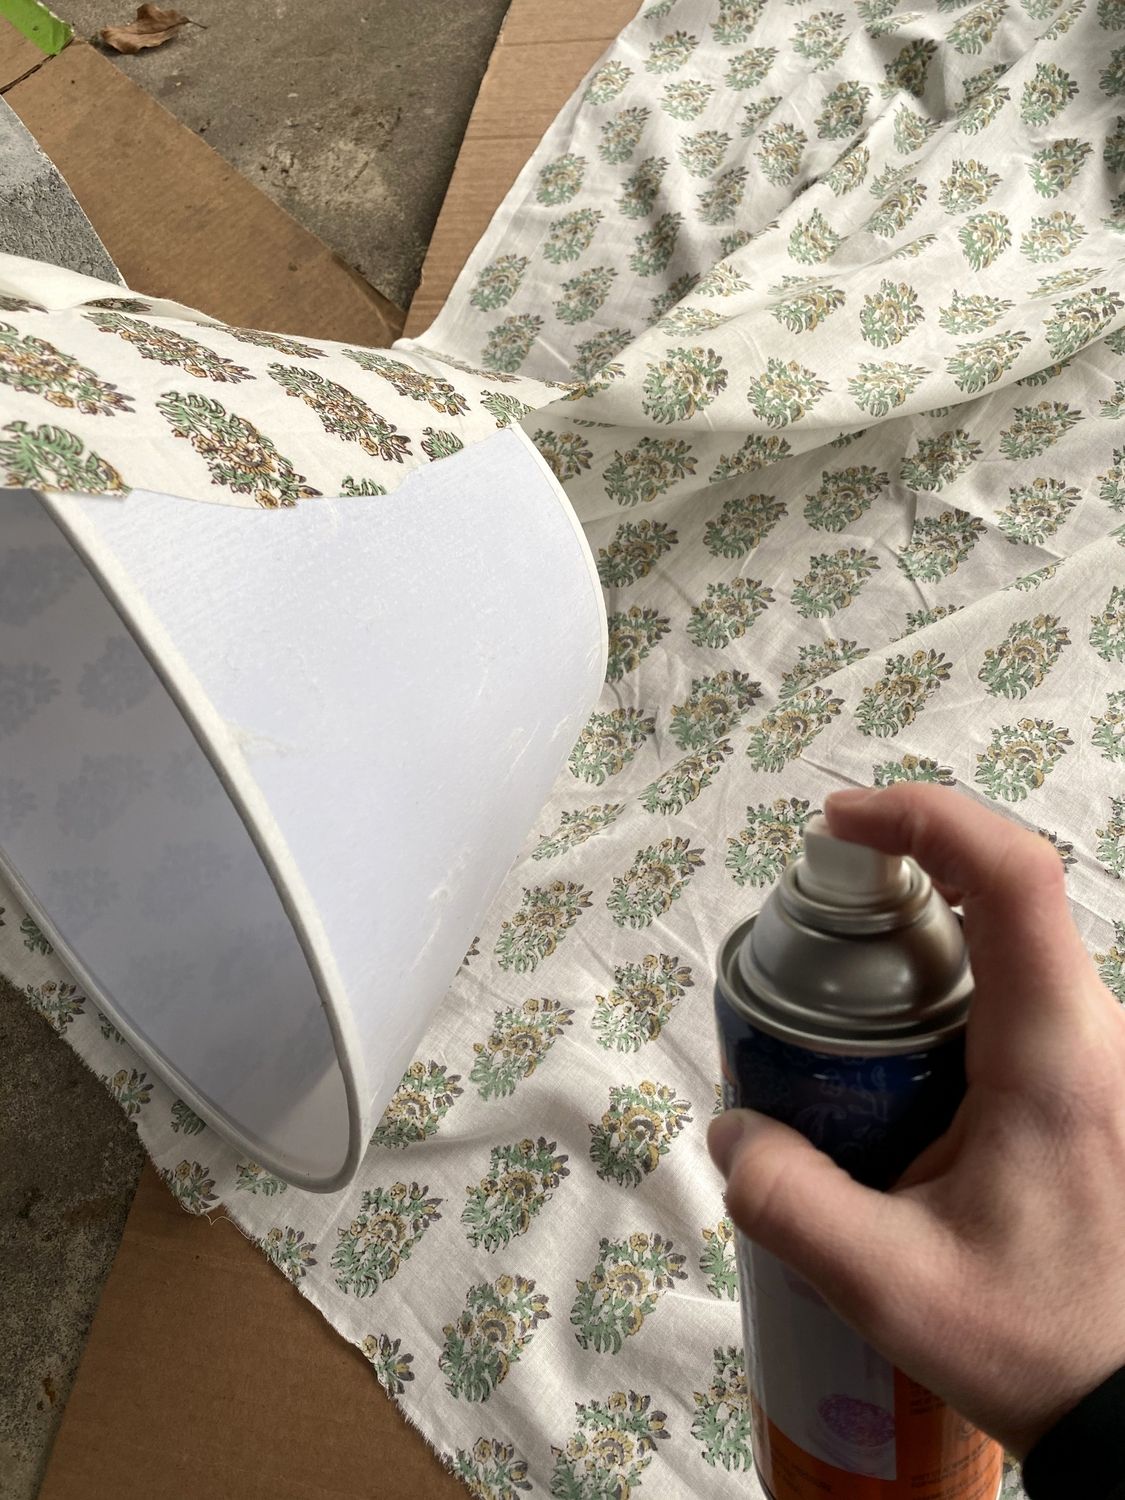 Diy Lampshades Creative Ways to Make Your Own Unique Lamp Shades